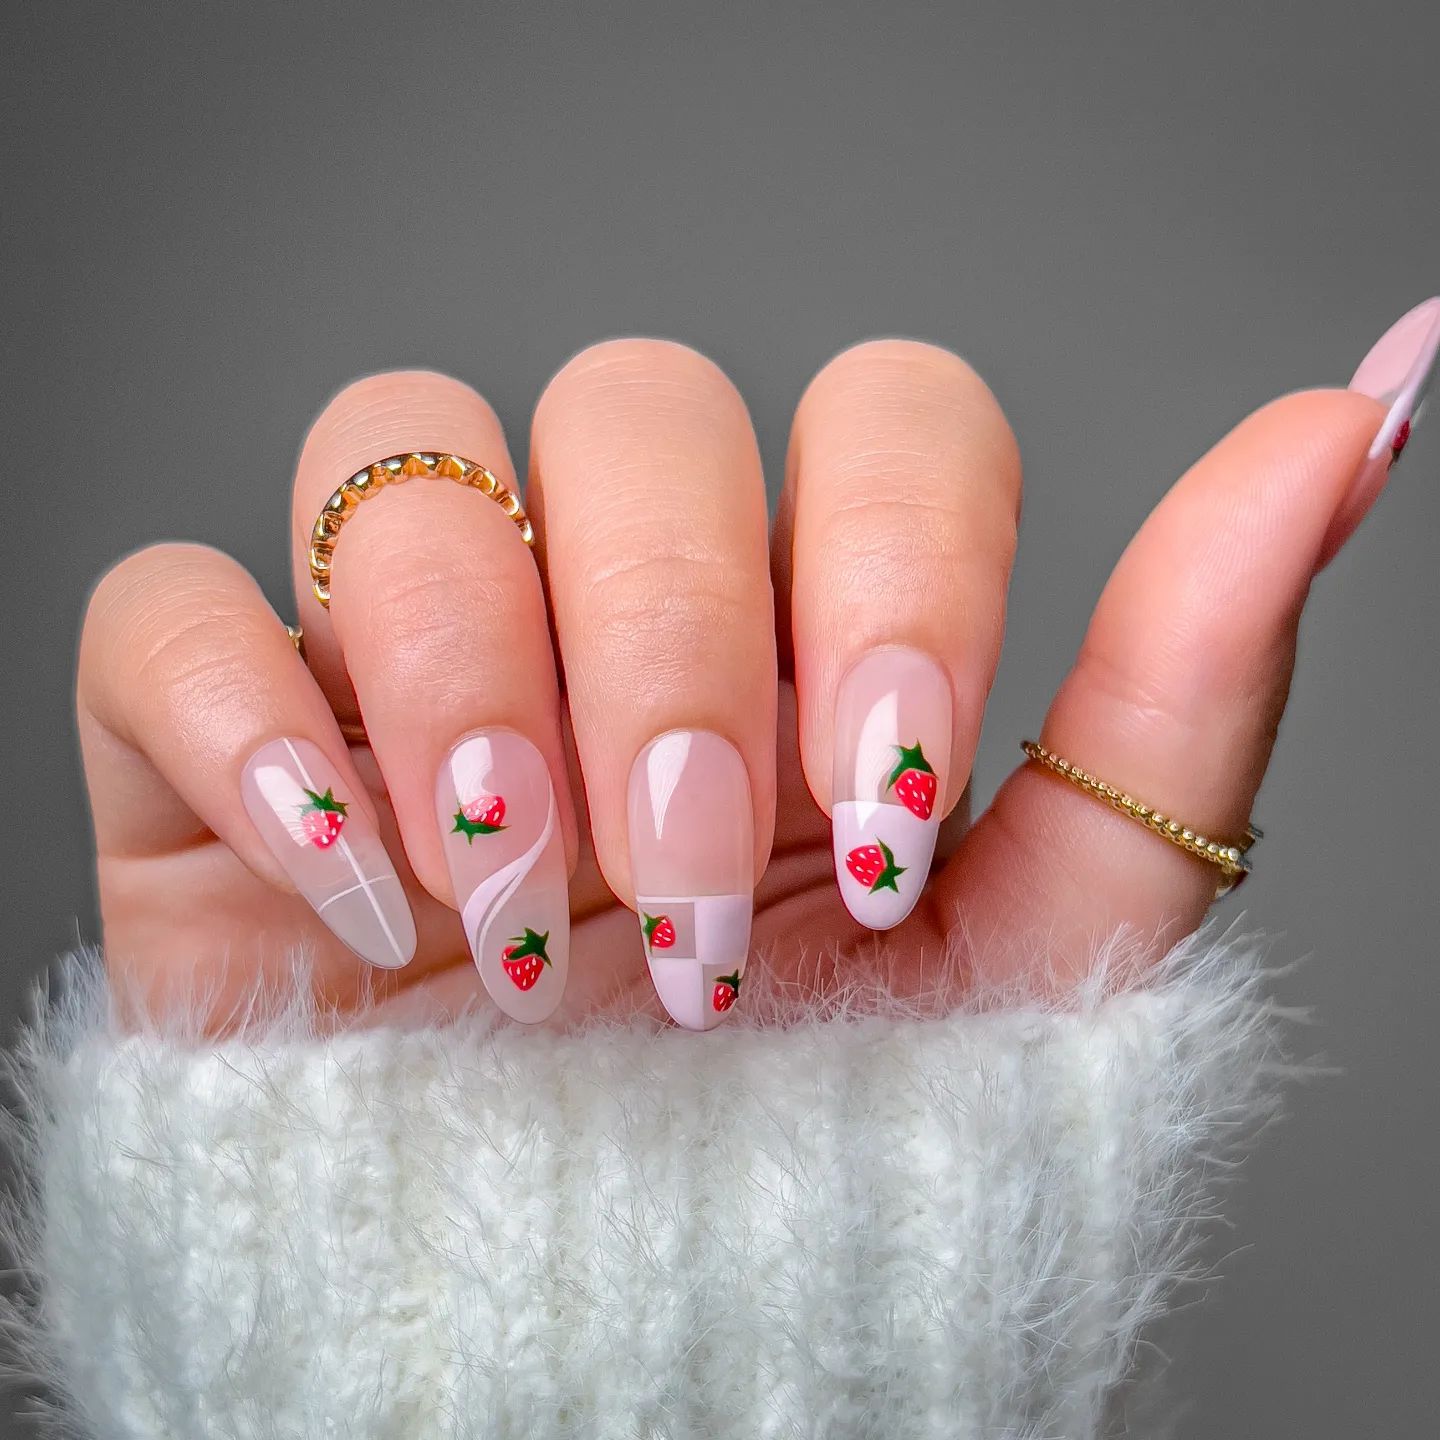 Almond Nails with Strawberry Design